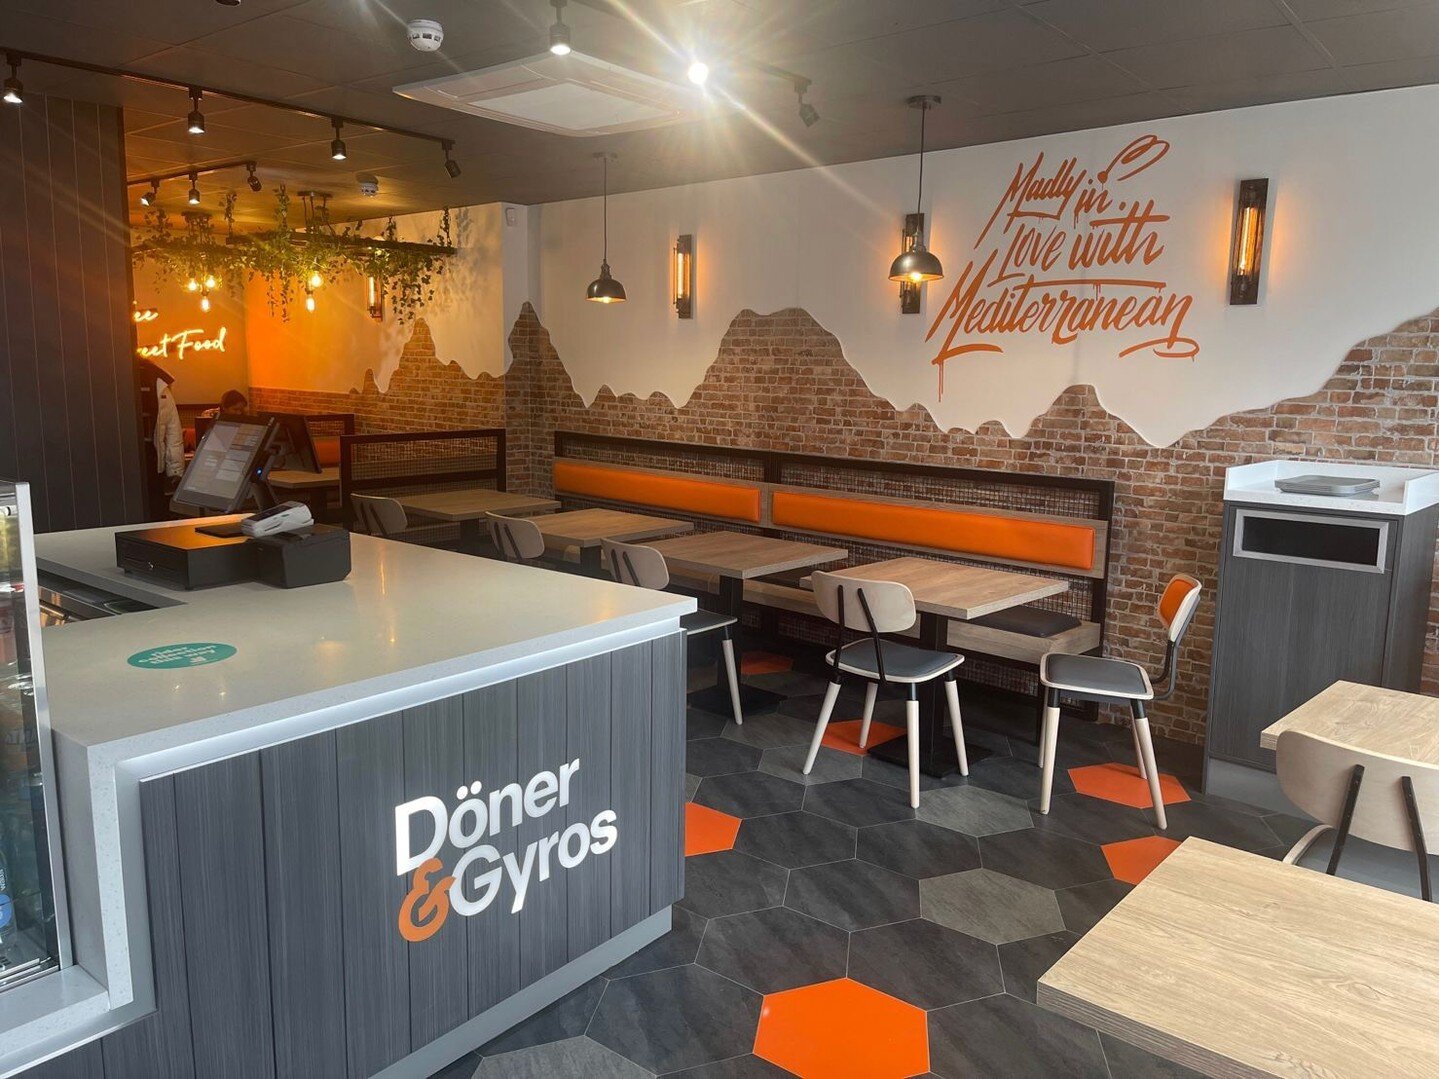 Our latest design for #Doner&amp;Gyros has opened in Rugby